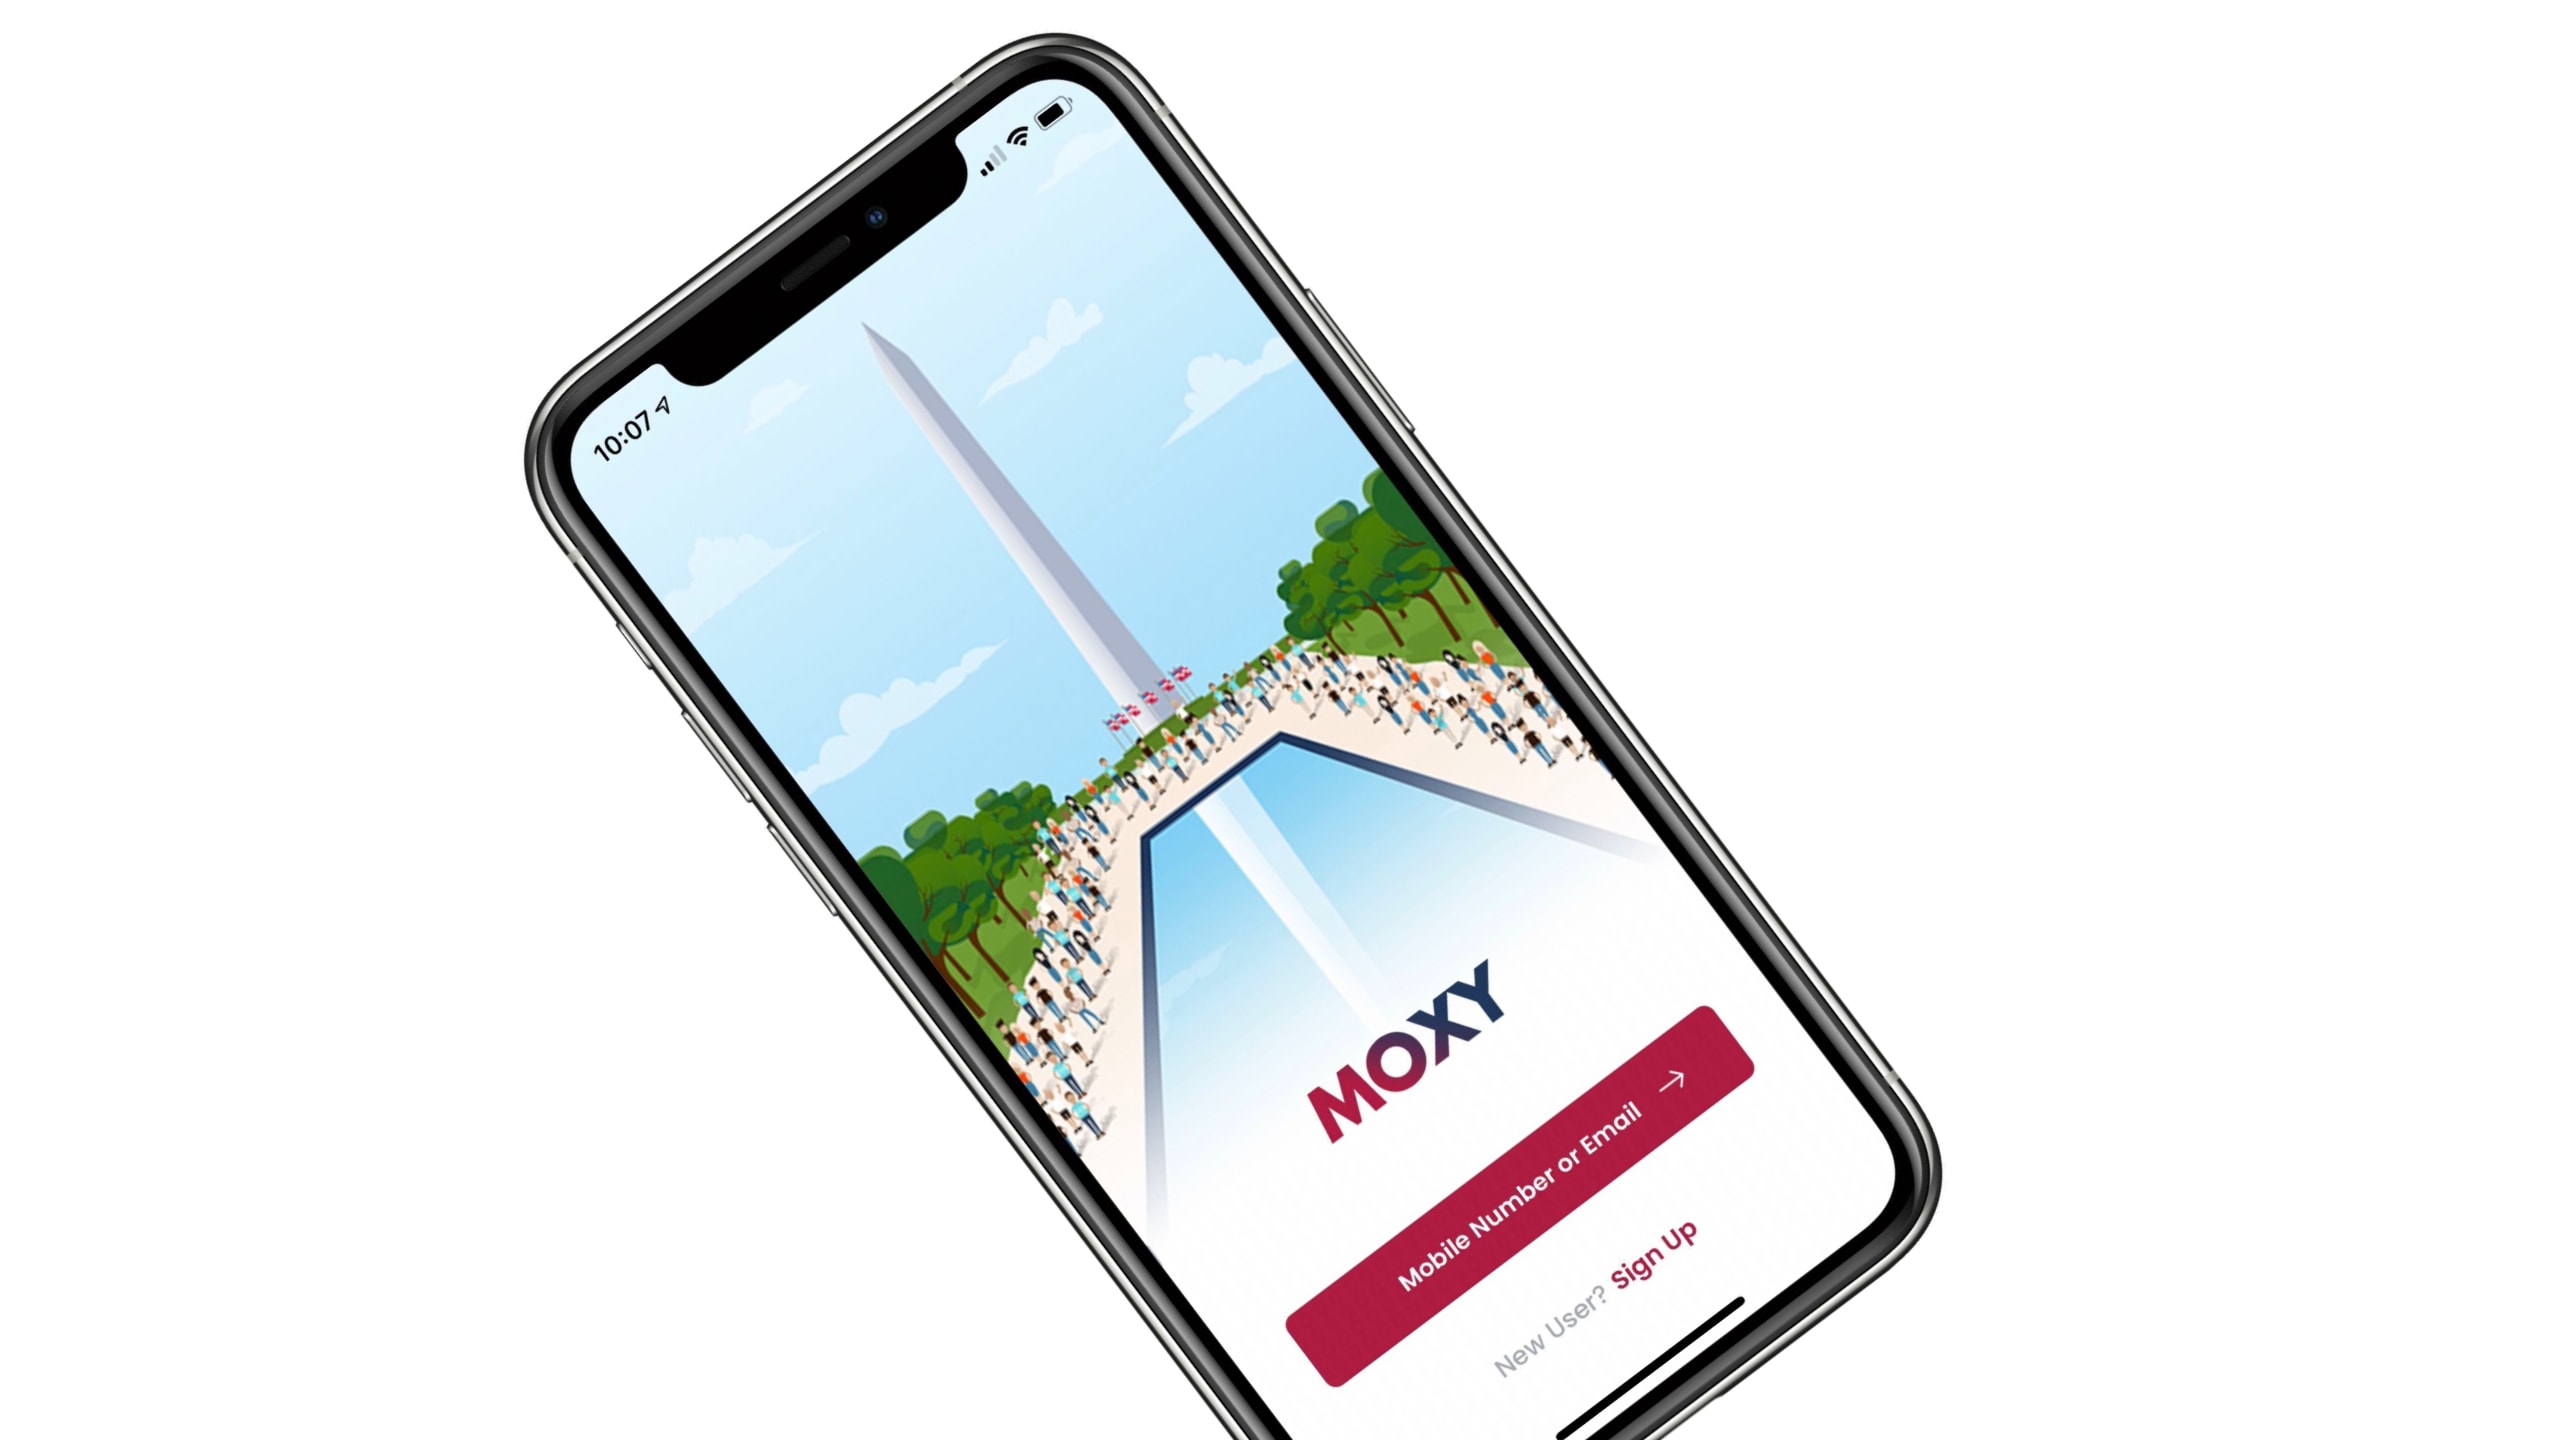 Moxy politics app: There's never been a better time to get engaged with politics.